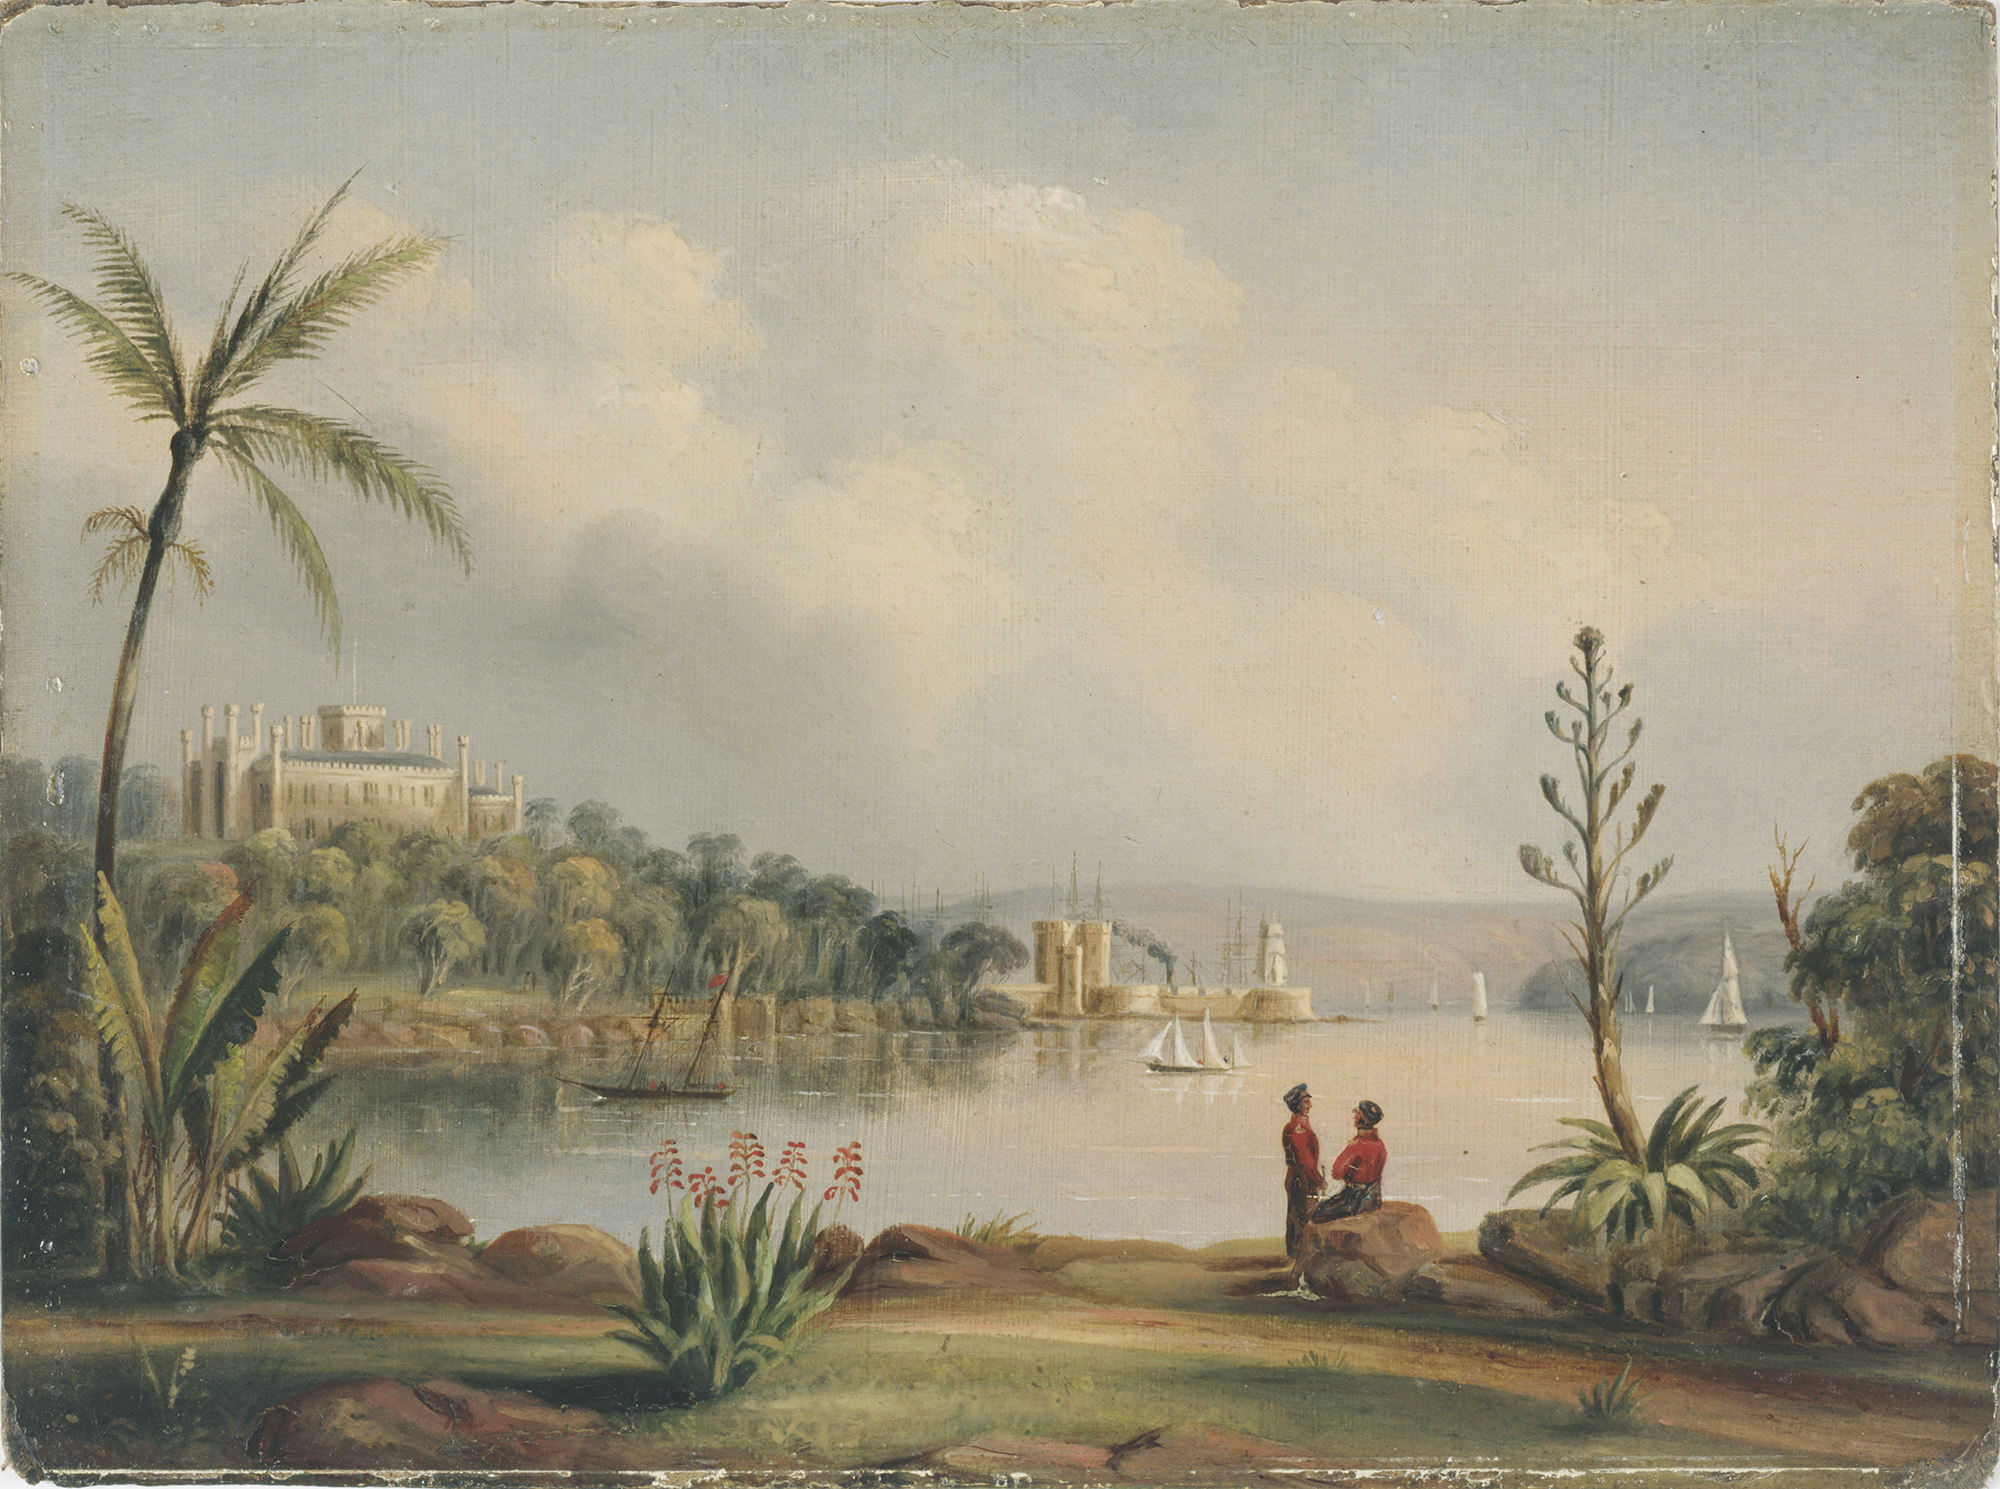 A painting: two soldiers in colonial military dress sit on a rock in the foreground looking across the harbour toward Government House, the top of which appears above the trees on the far shore. Sailboats are dotted across the water.